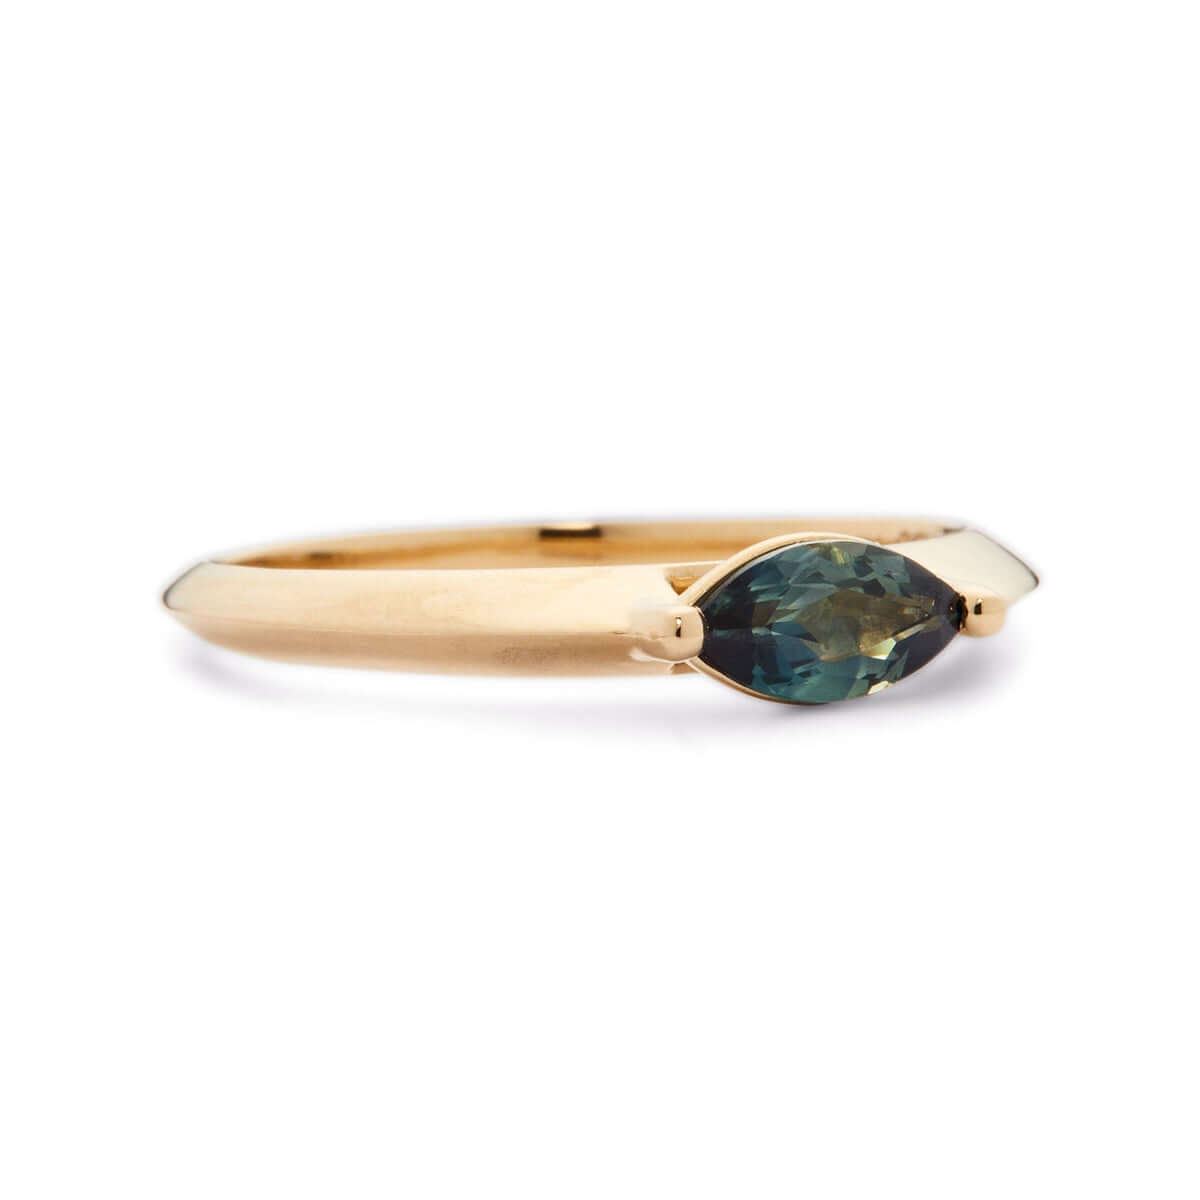 A tilted view of a yellow gold ring with a marquise-cut Australian sapphire against white.